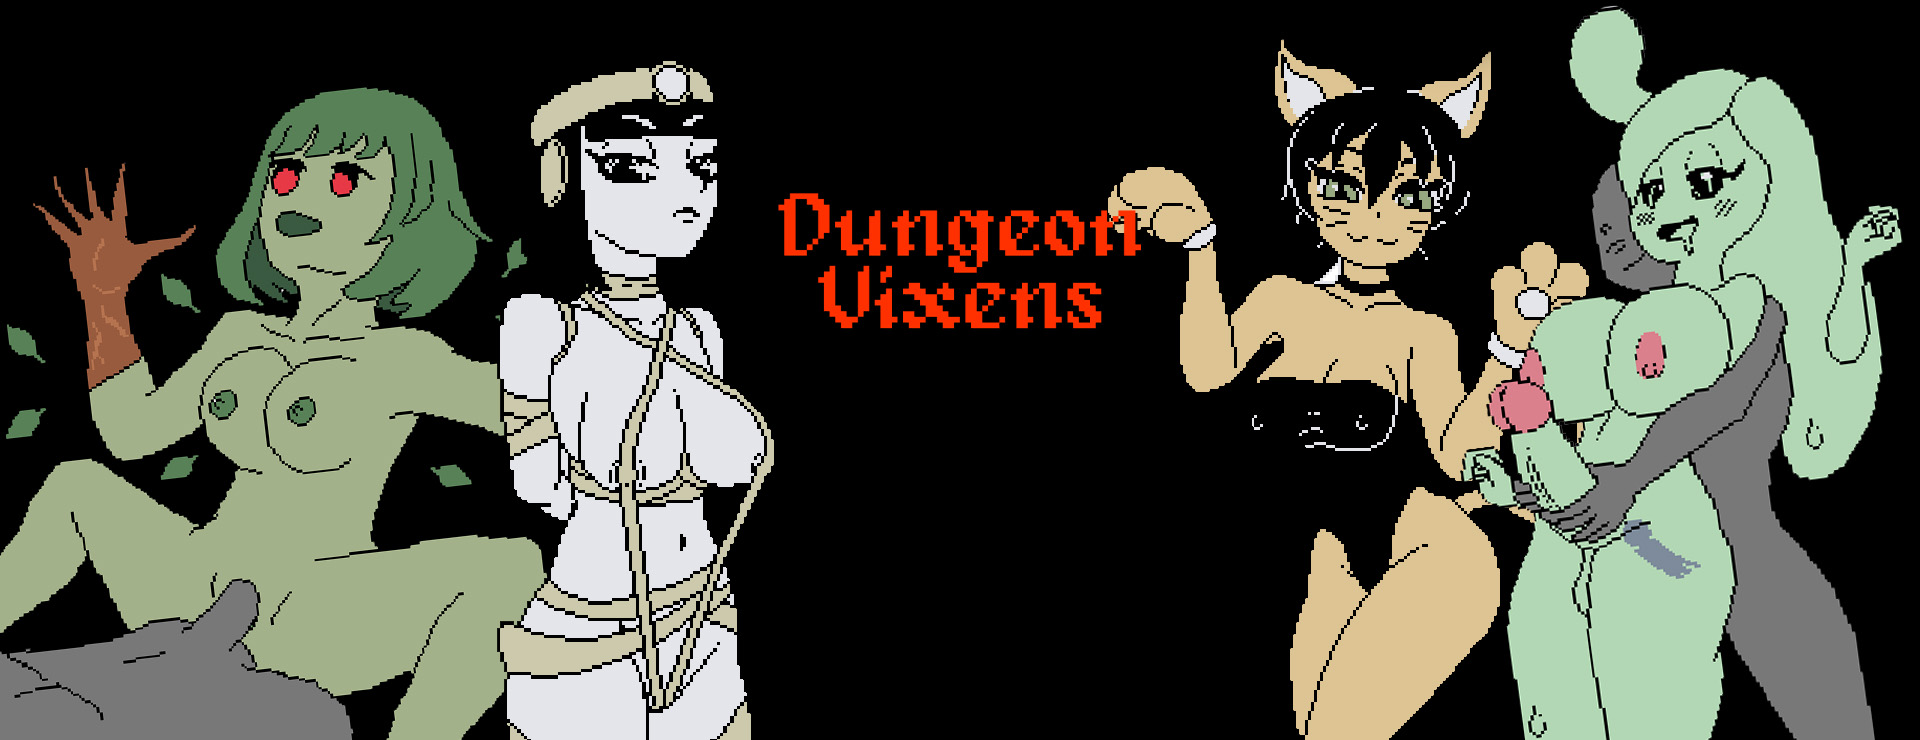 Dungeon Vixens: A Tale of Temptation - Adventure Game